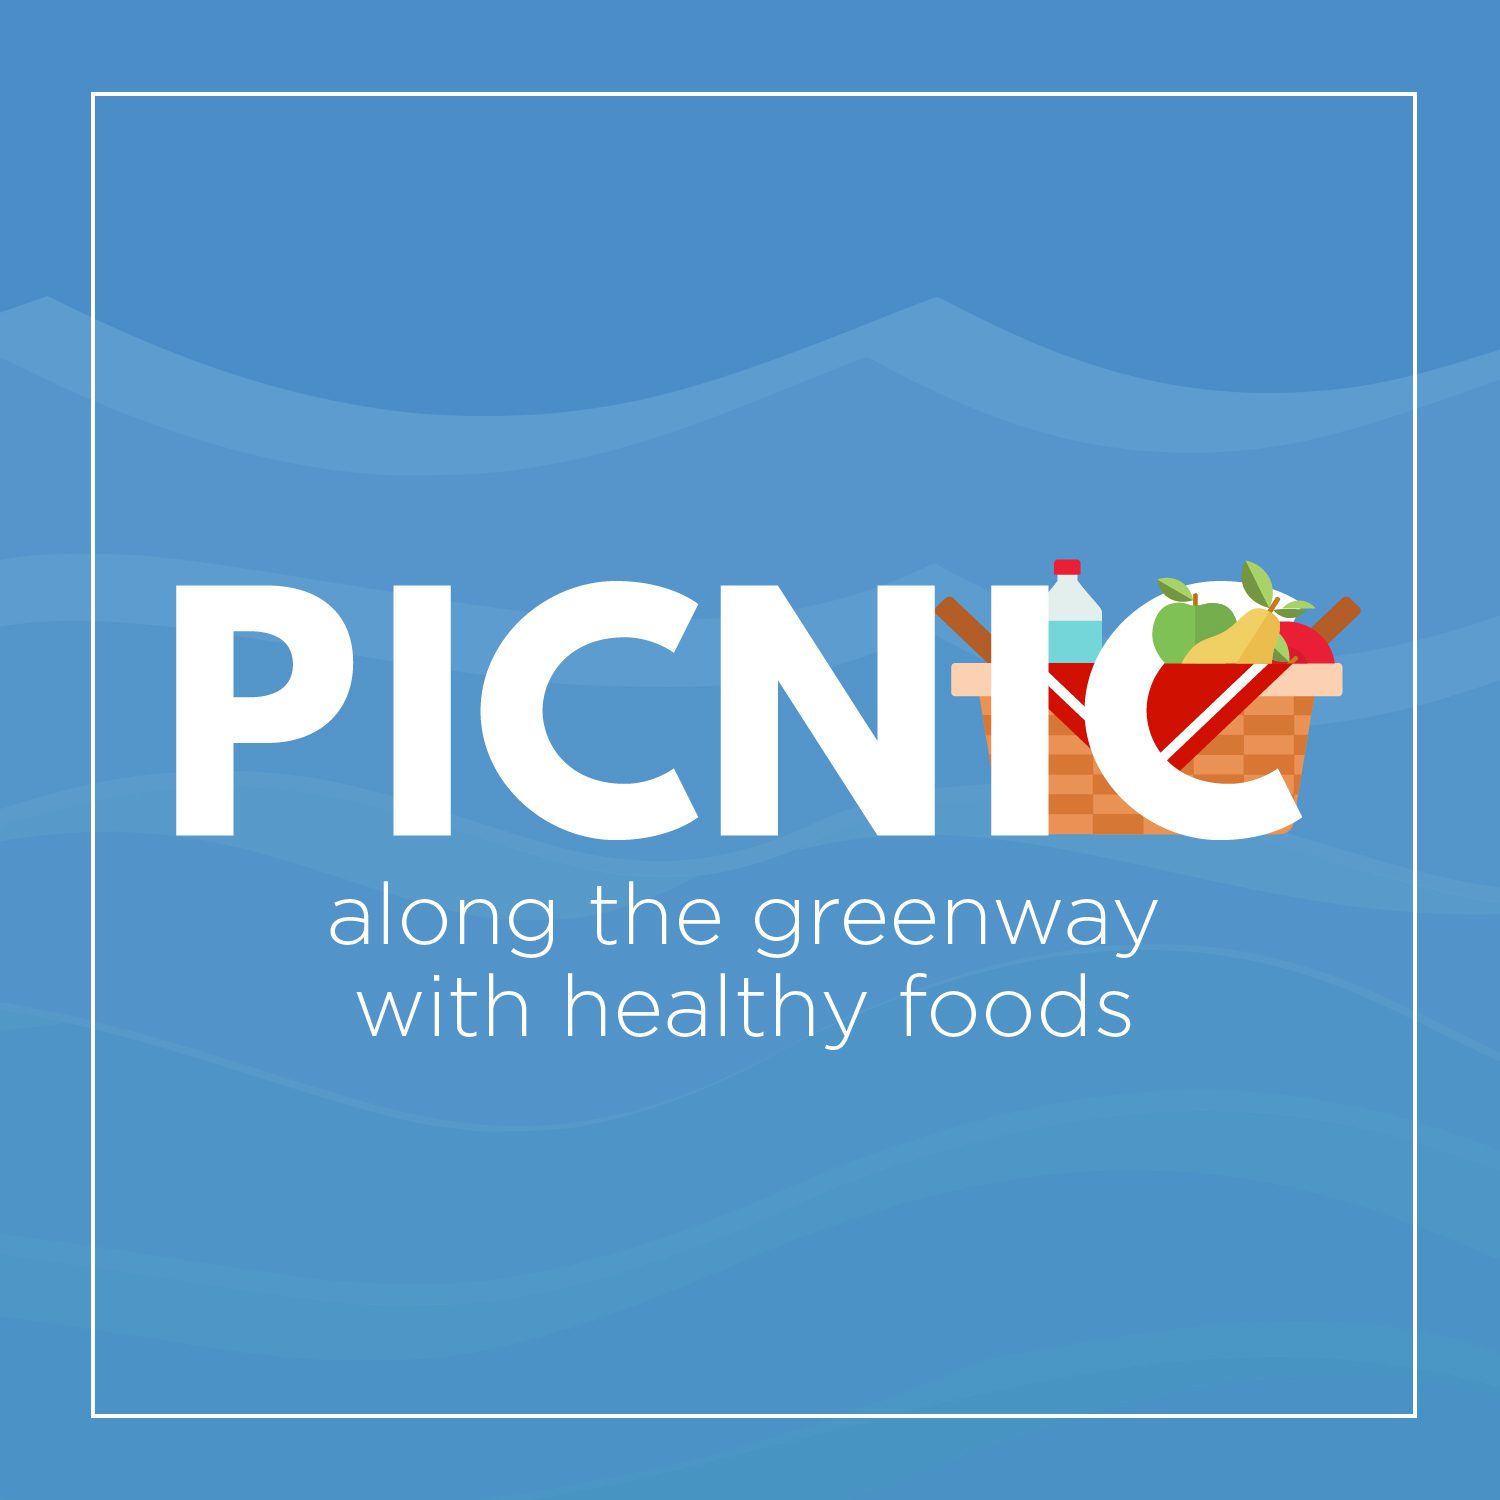 Picnic along the greenway with healthy foods